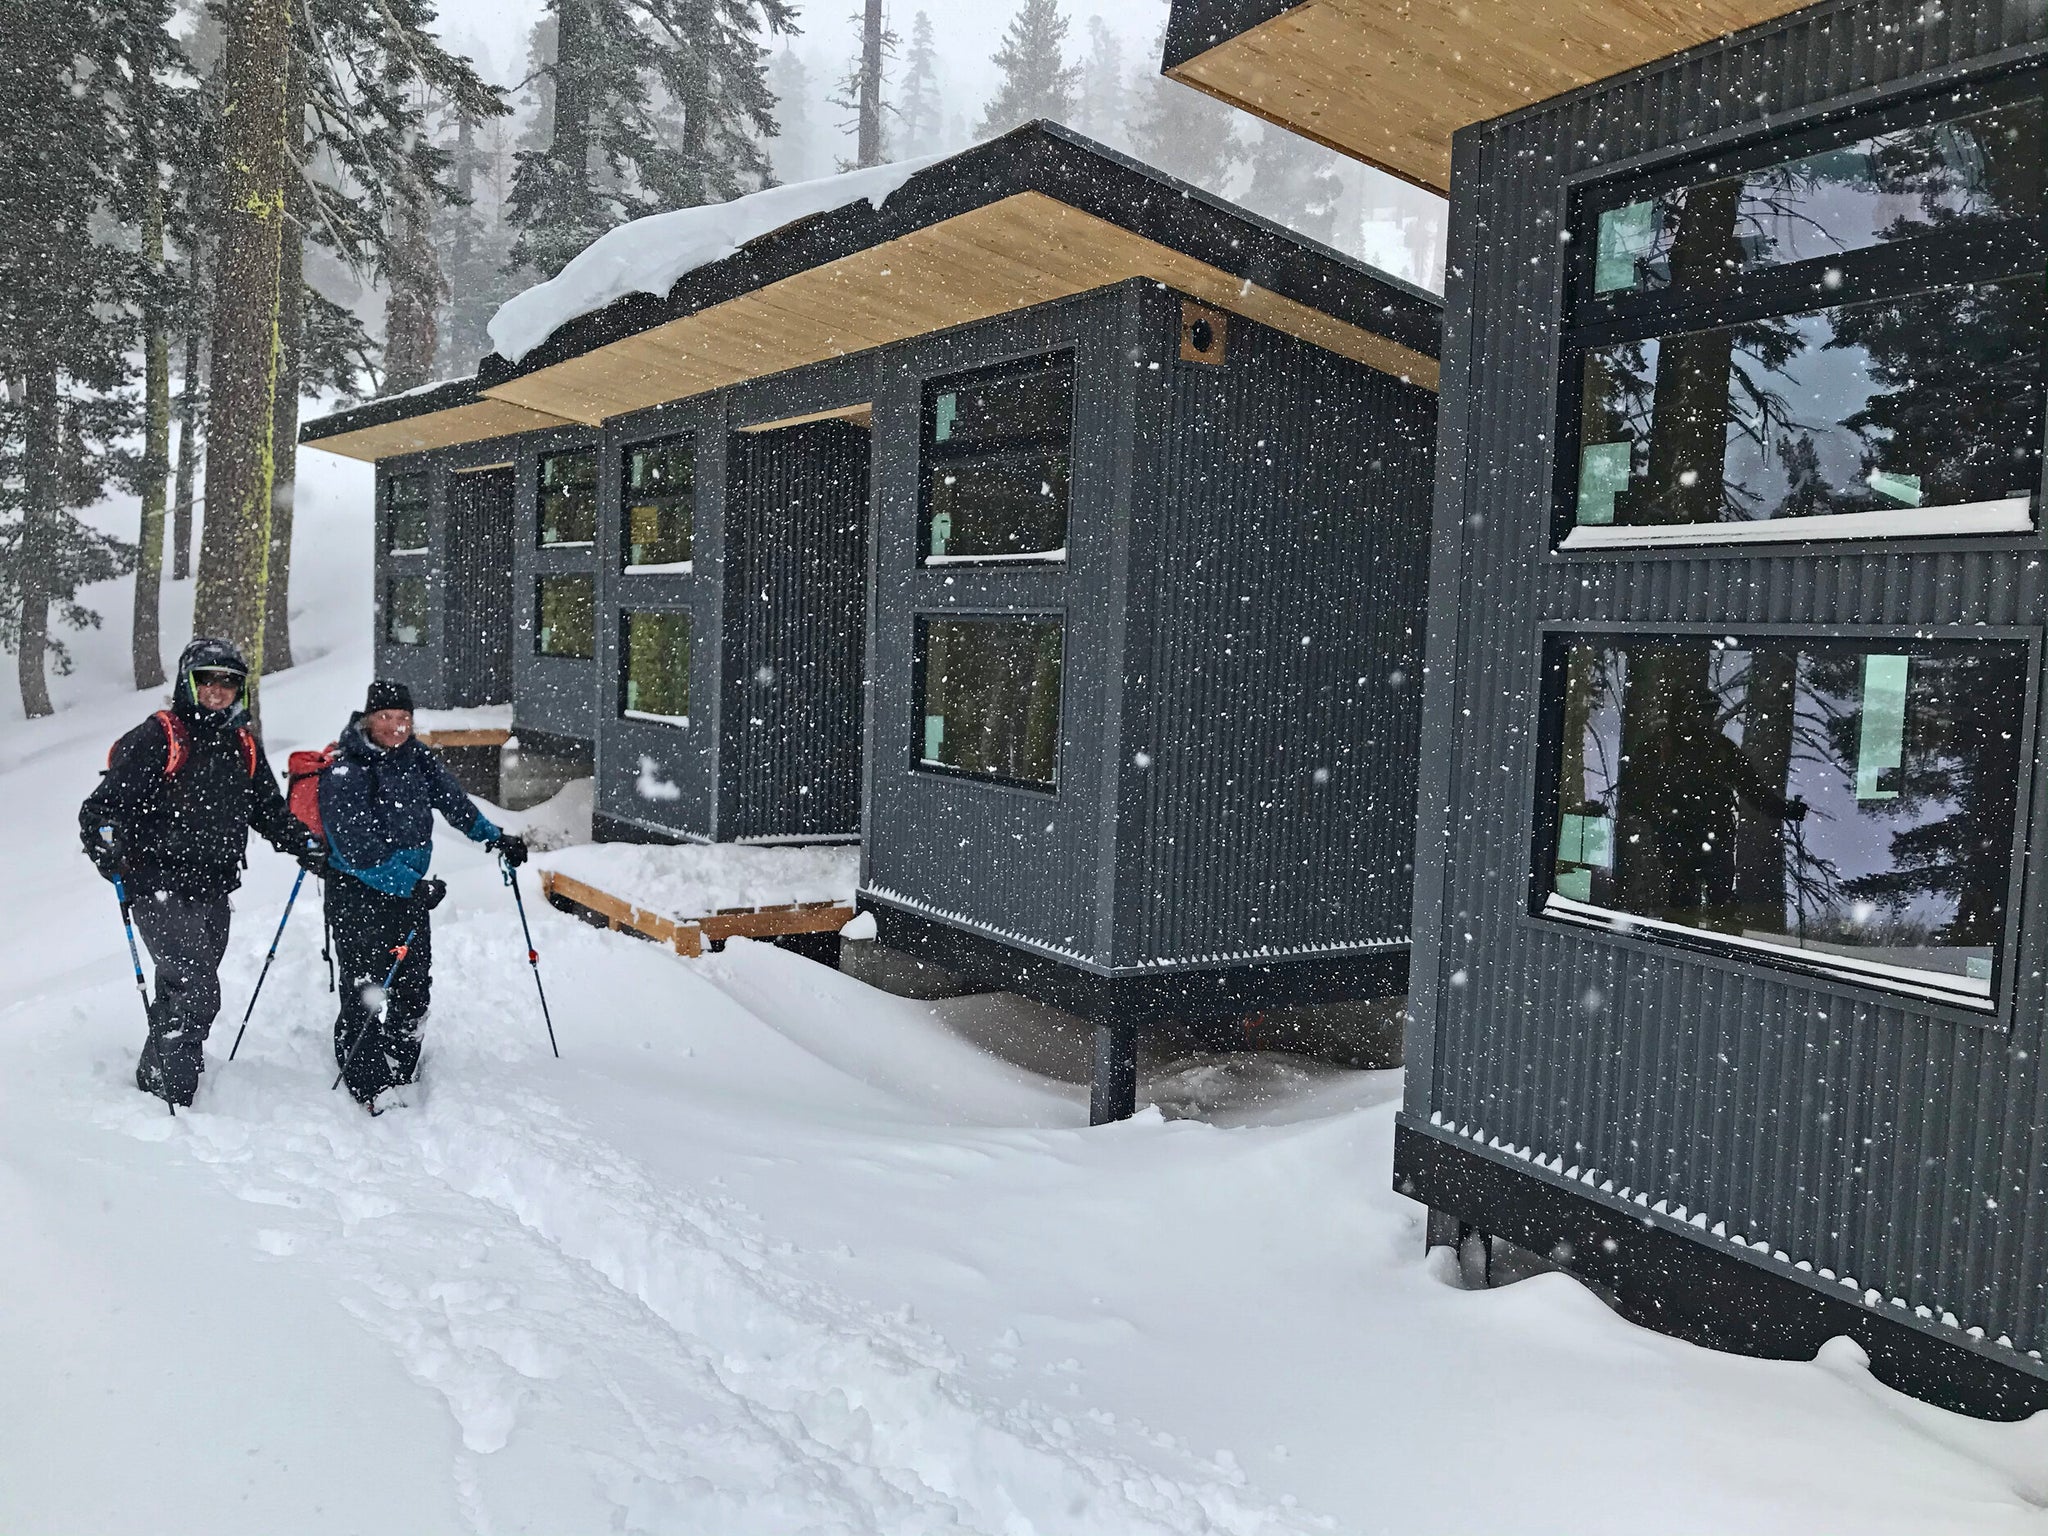 The New Frog Lake Backcountry Huts in Truckee